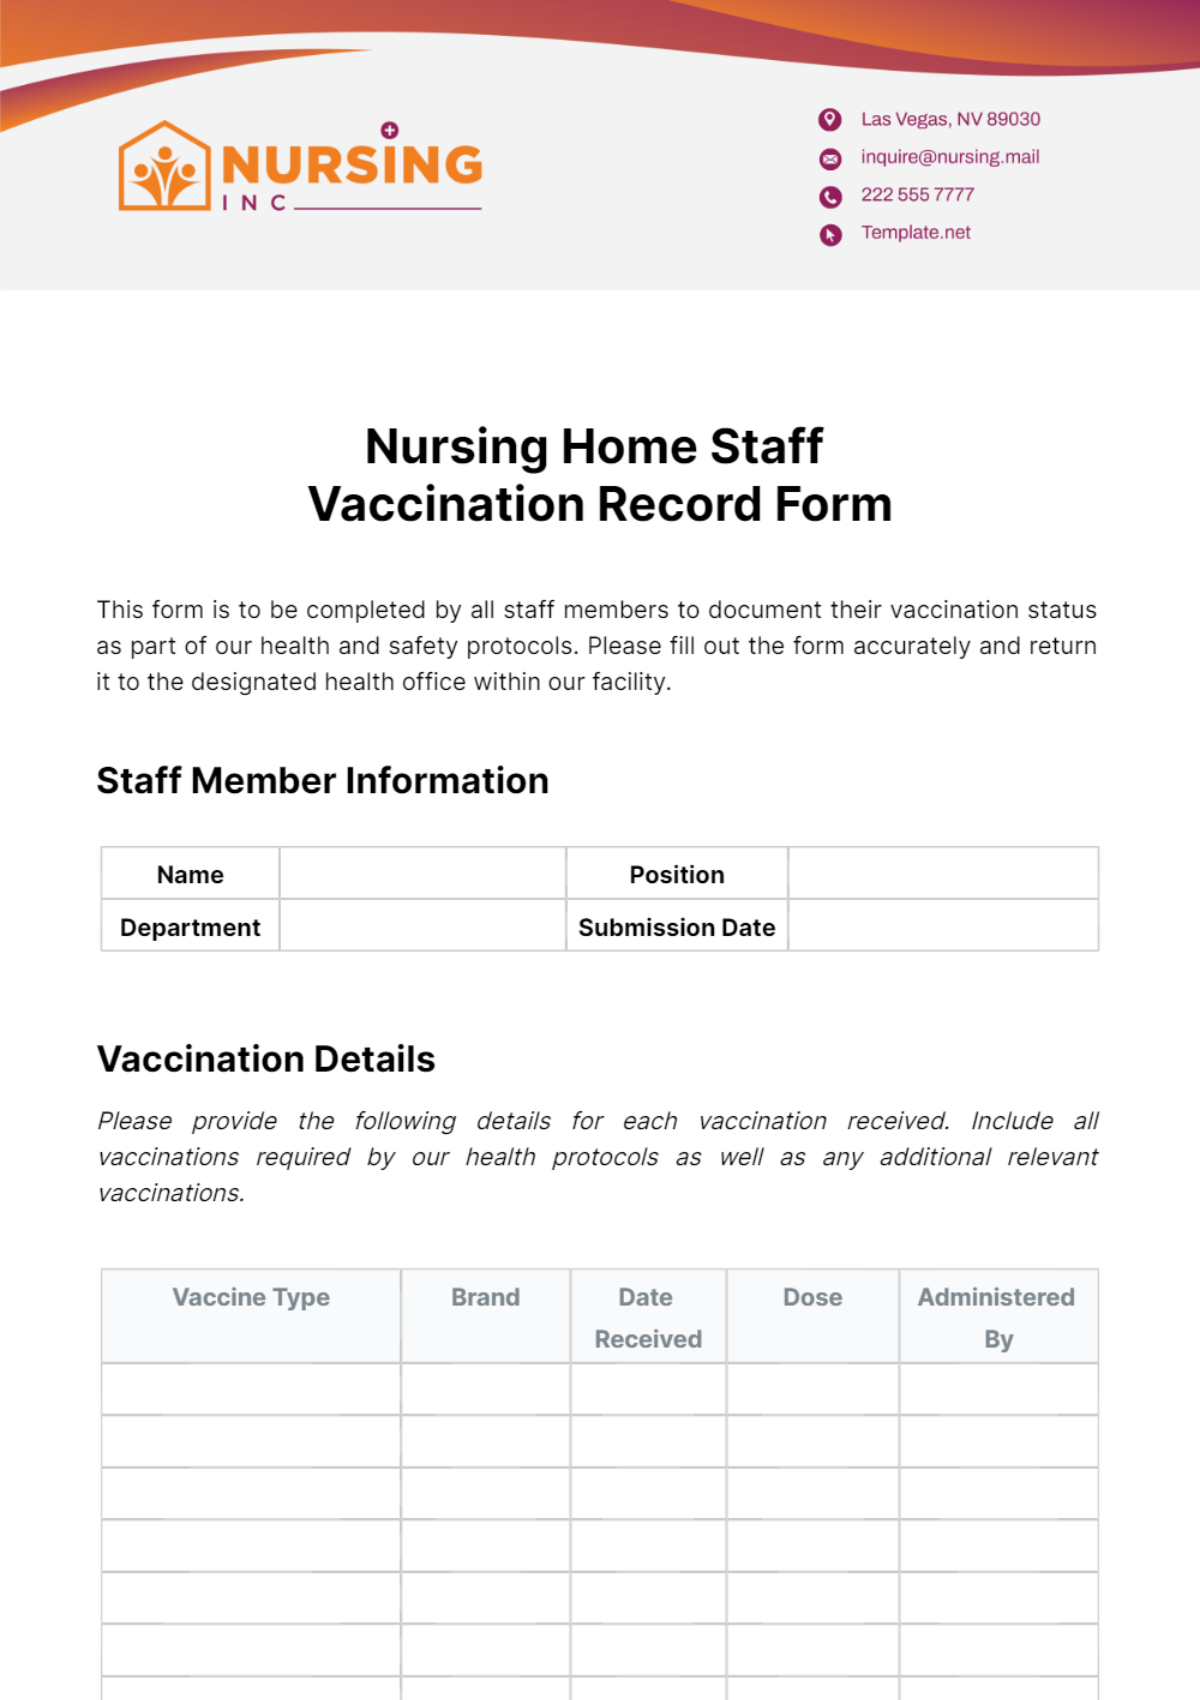 Nursing Home Staff Vaccination Record Form Template